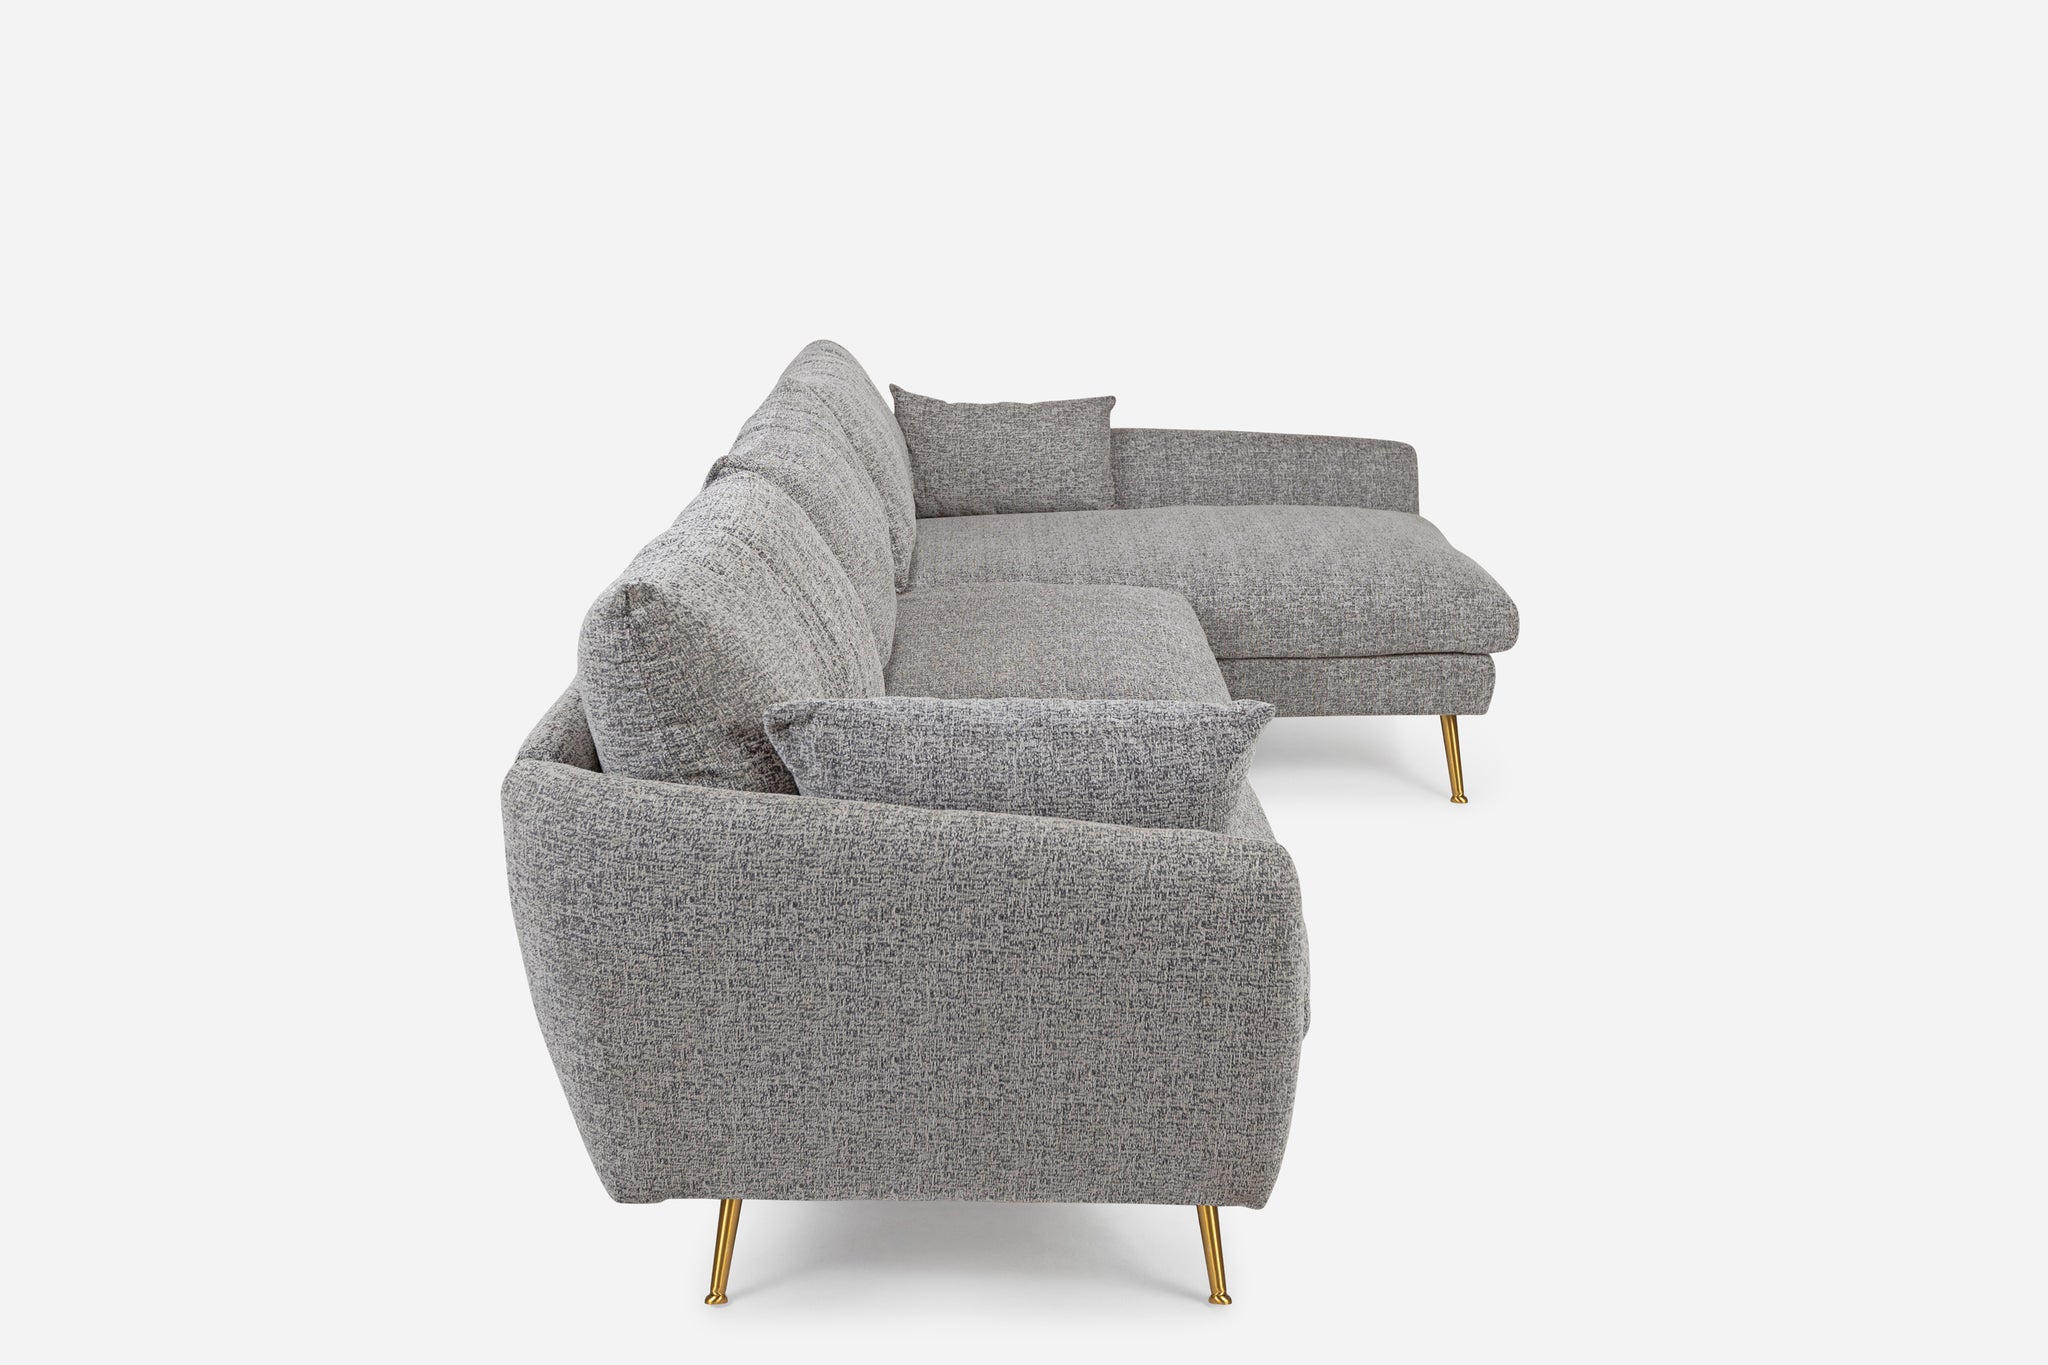 park sectional sofa shown in grey fabric with gold legs right facing